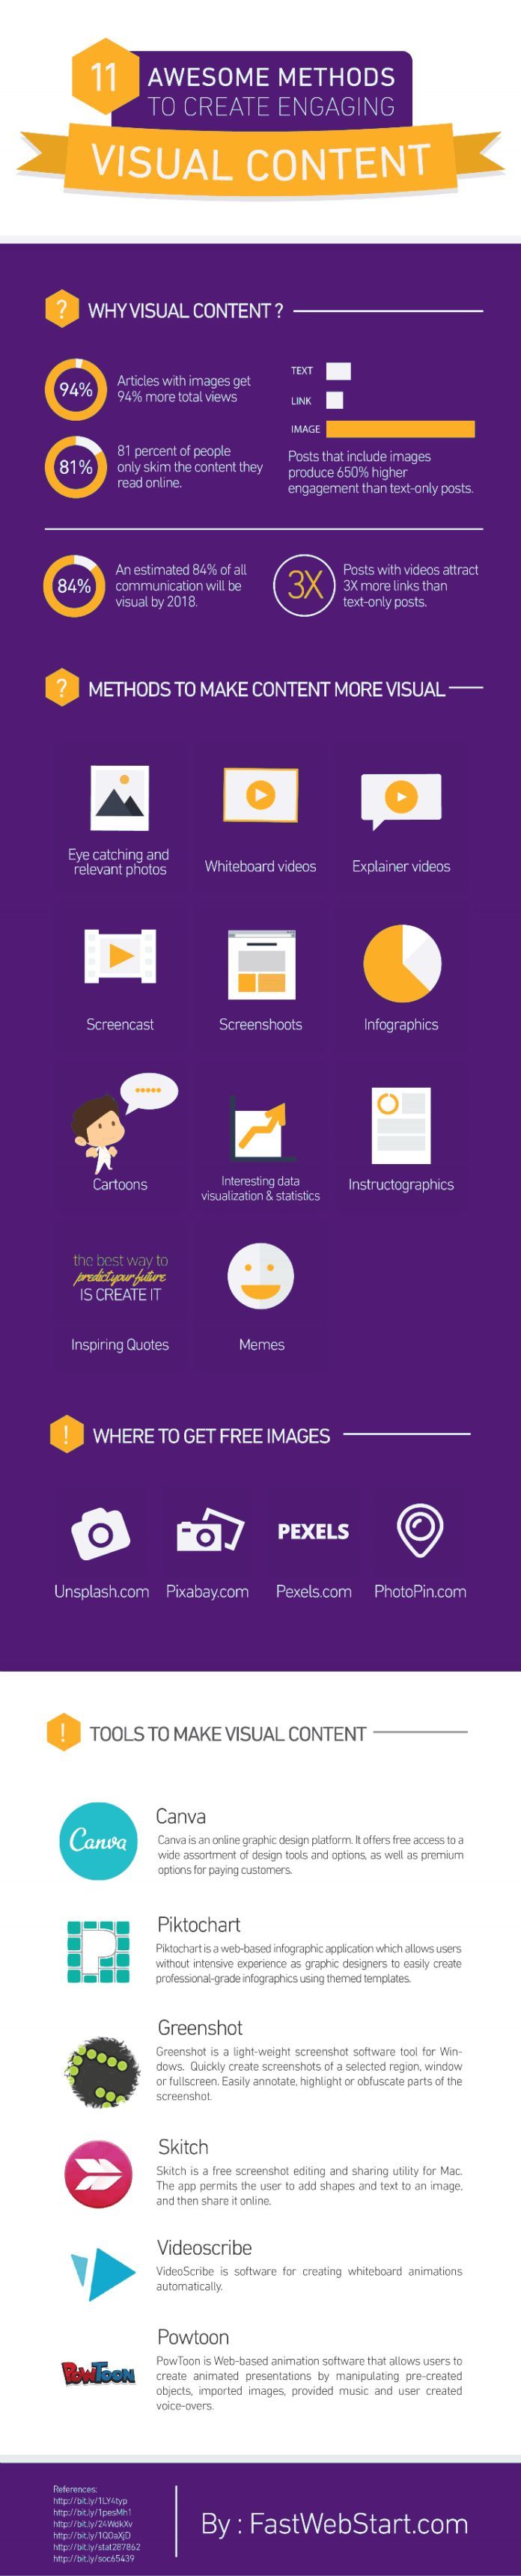 1532427187_126_Marketing-Infographic-Ready-to-create-visual-content-Find-11-fresh-visual-content-ideas-with-a-choice Marketing Infographic : Ready to create visual content? Find 11 fresh visual content ideas with a choice...